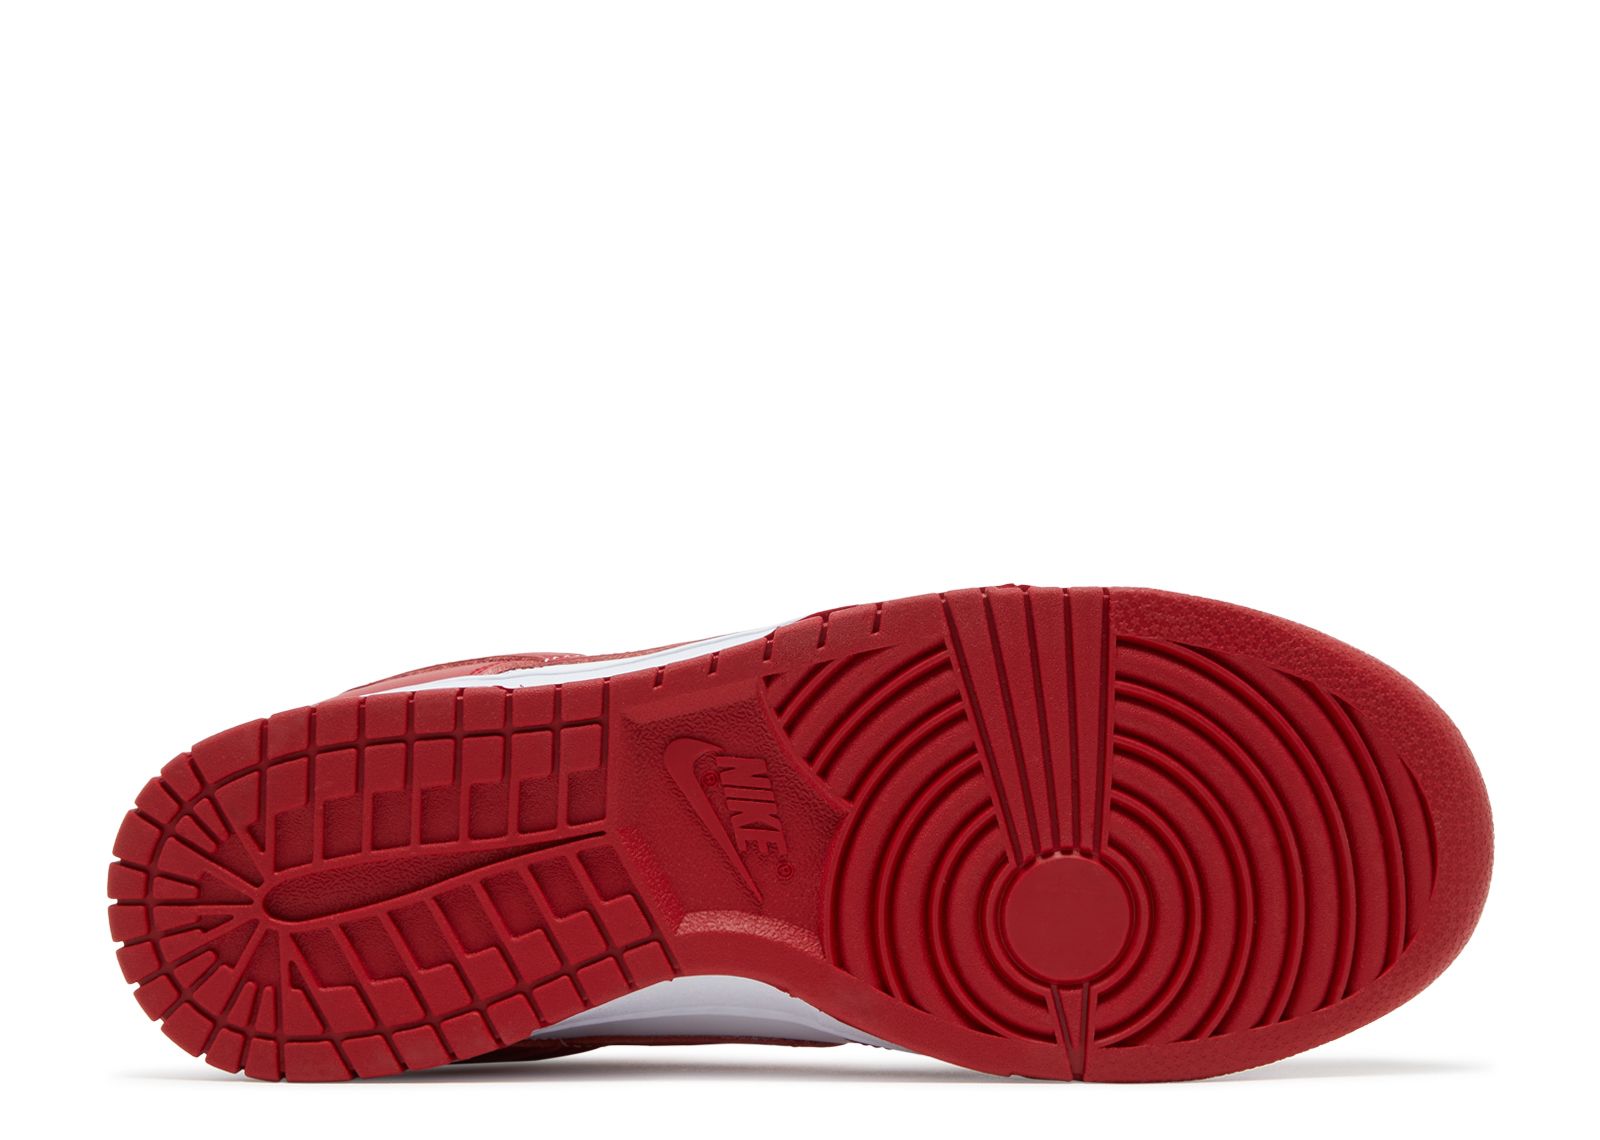 Dunk Low 'Gym Red' - Nike - DD1391 602 - gym red/white/university 